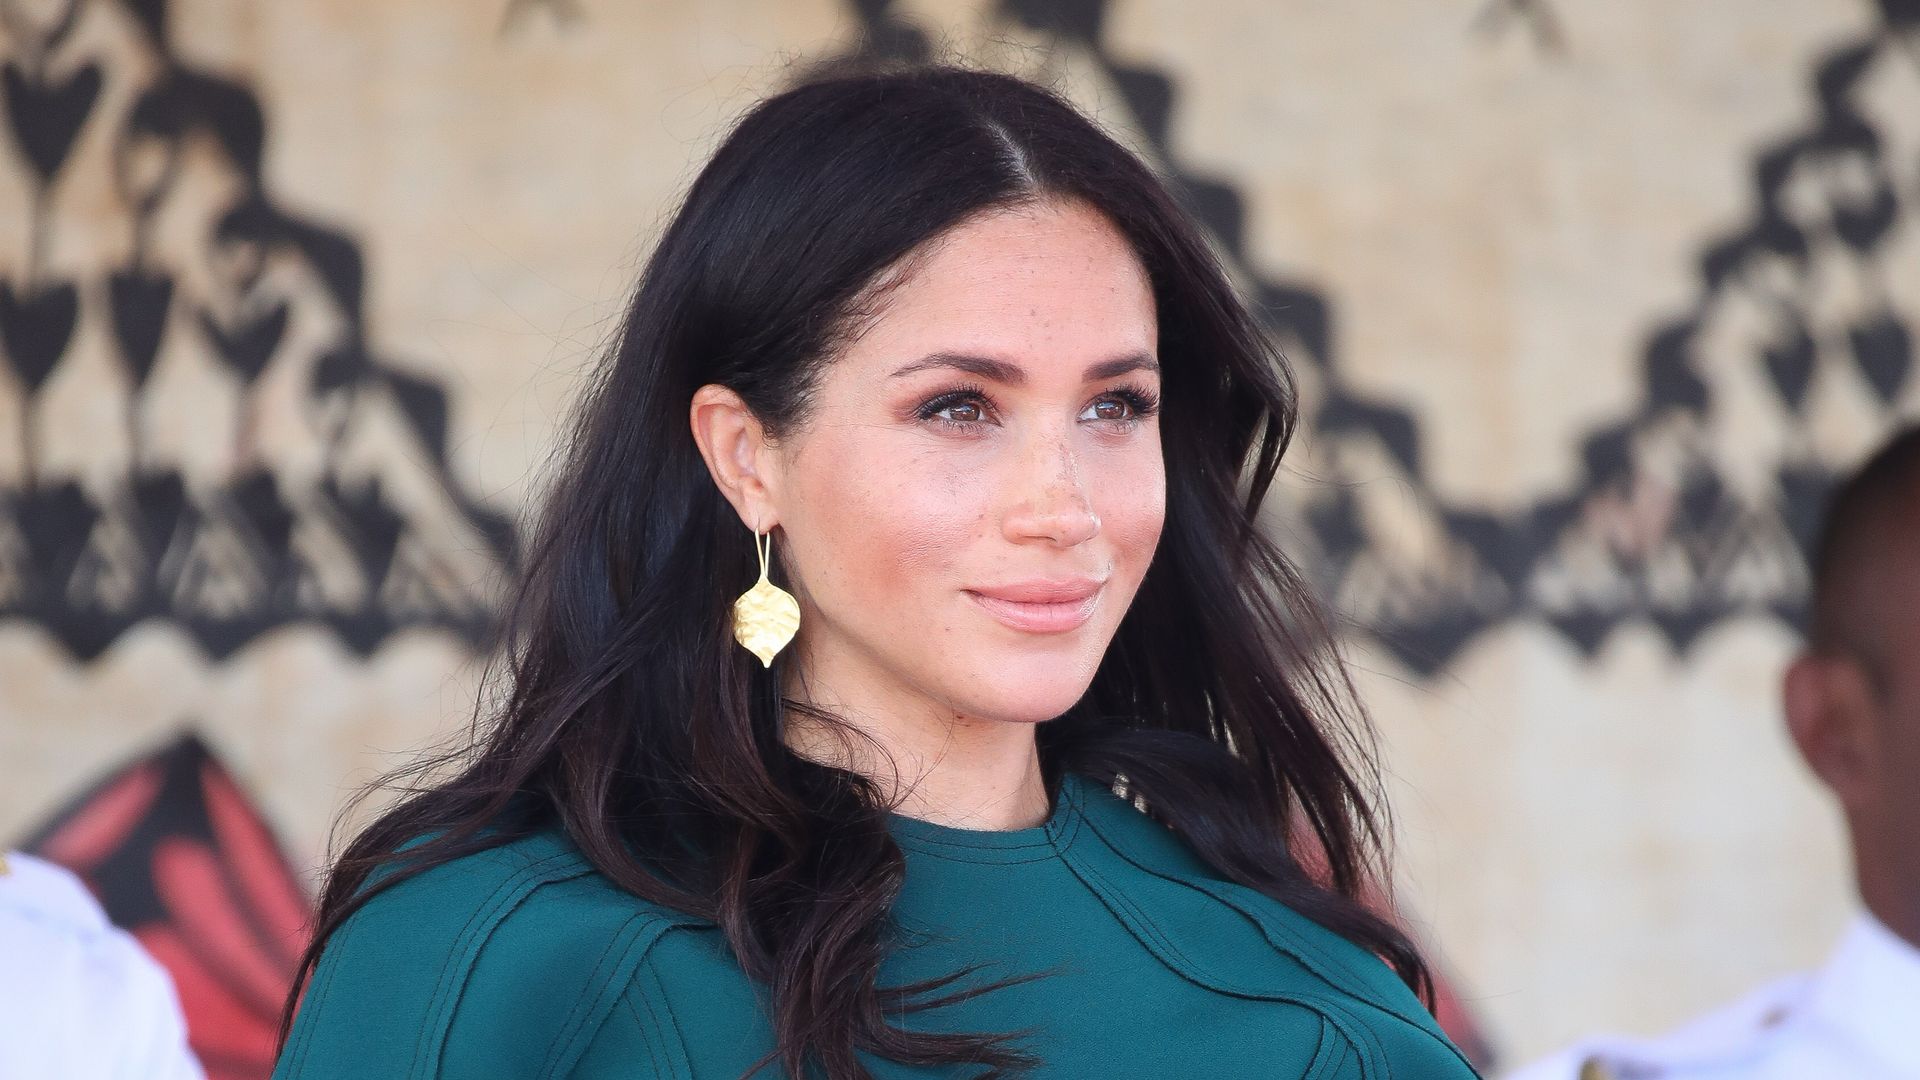 Meghan Markle first wore her luxury handmade Pippa Small gold leaf earrings in 2018